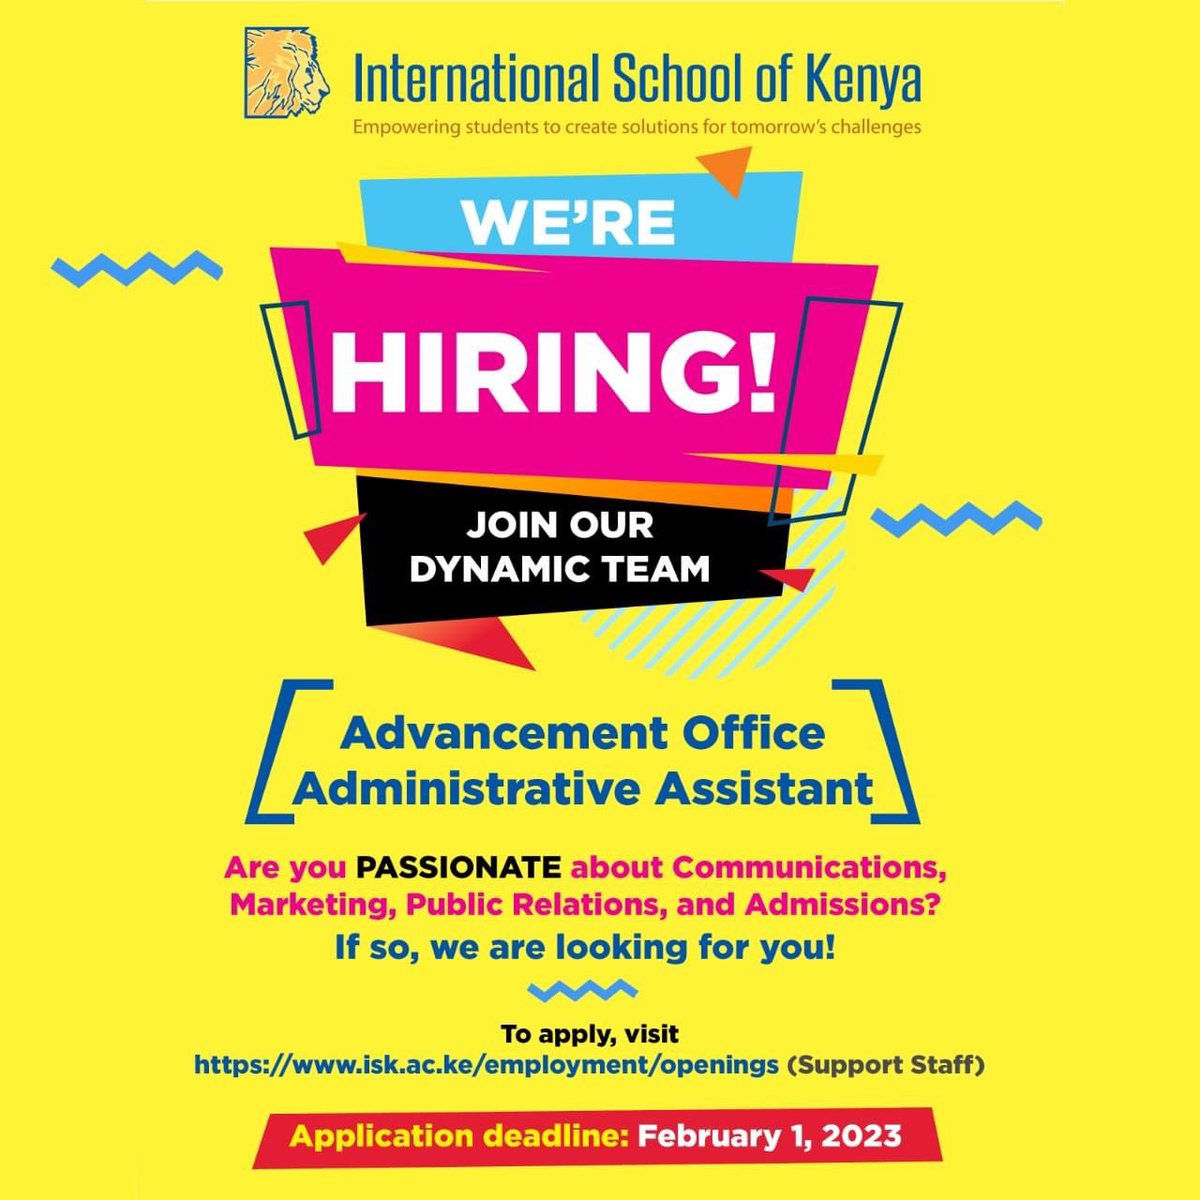 ISK seeks an energetic, optimistic, creative person to serve as an Administrative Assistant, providing support to the Advancement Office. Please spread the word! isk.ac.ke/employment/ope… 

#iskpassion #iskcreativity #iskambition